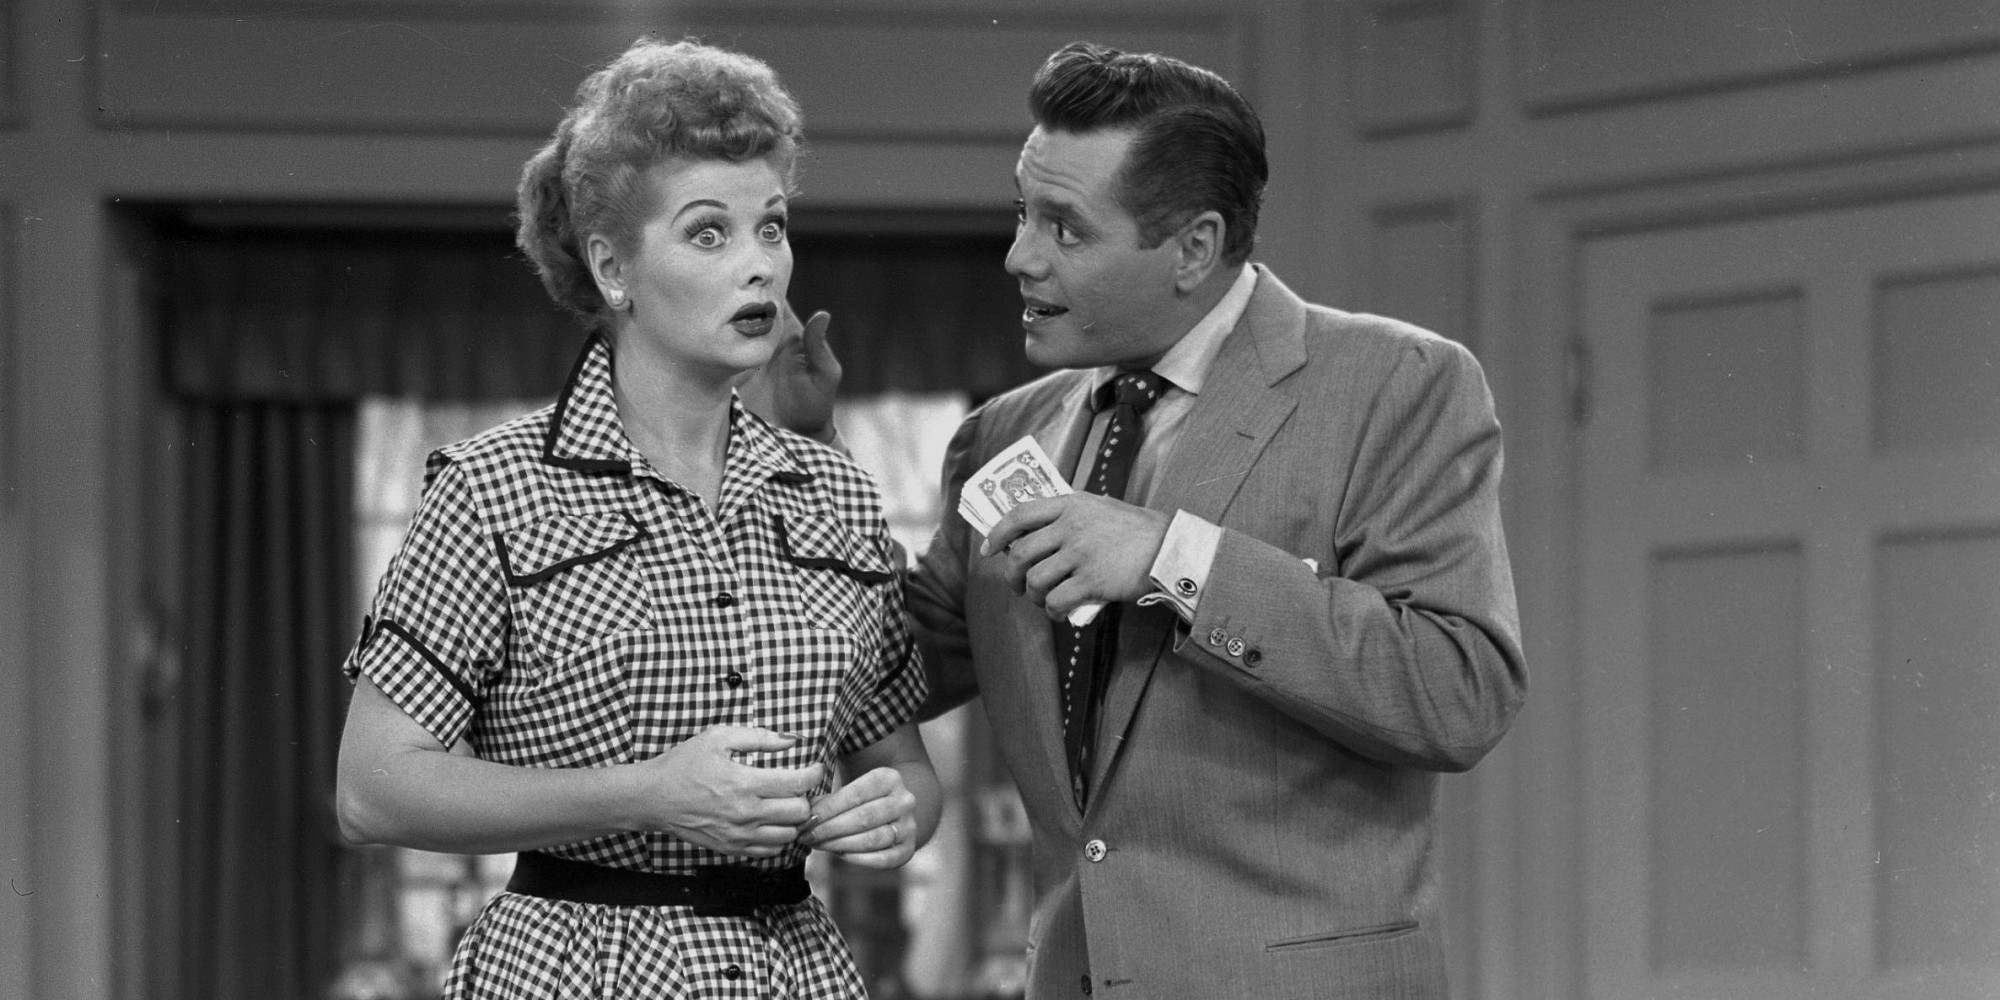 How Much Random 1950s Knowledge Do You Have? Lucille Ball And Desi Arnaz In 'I Love Lucy'